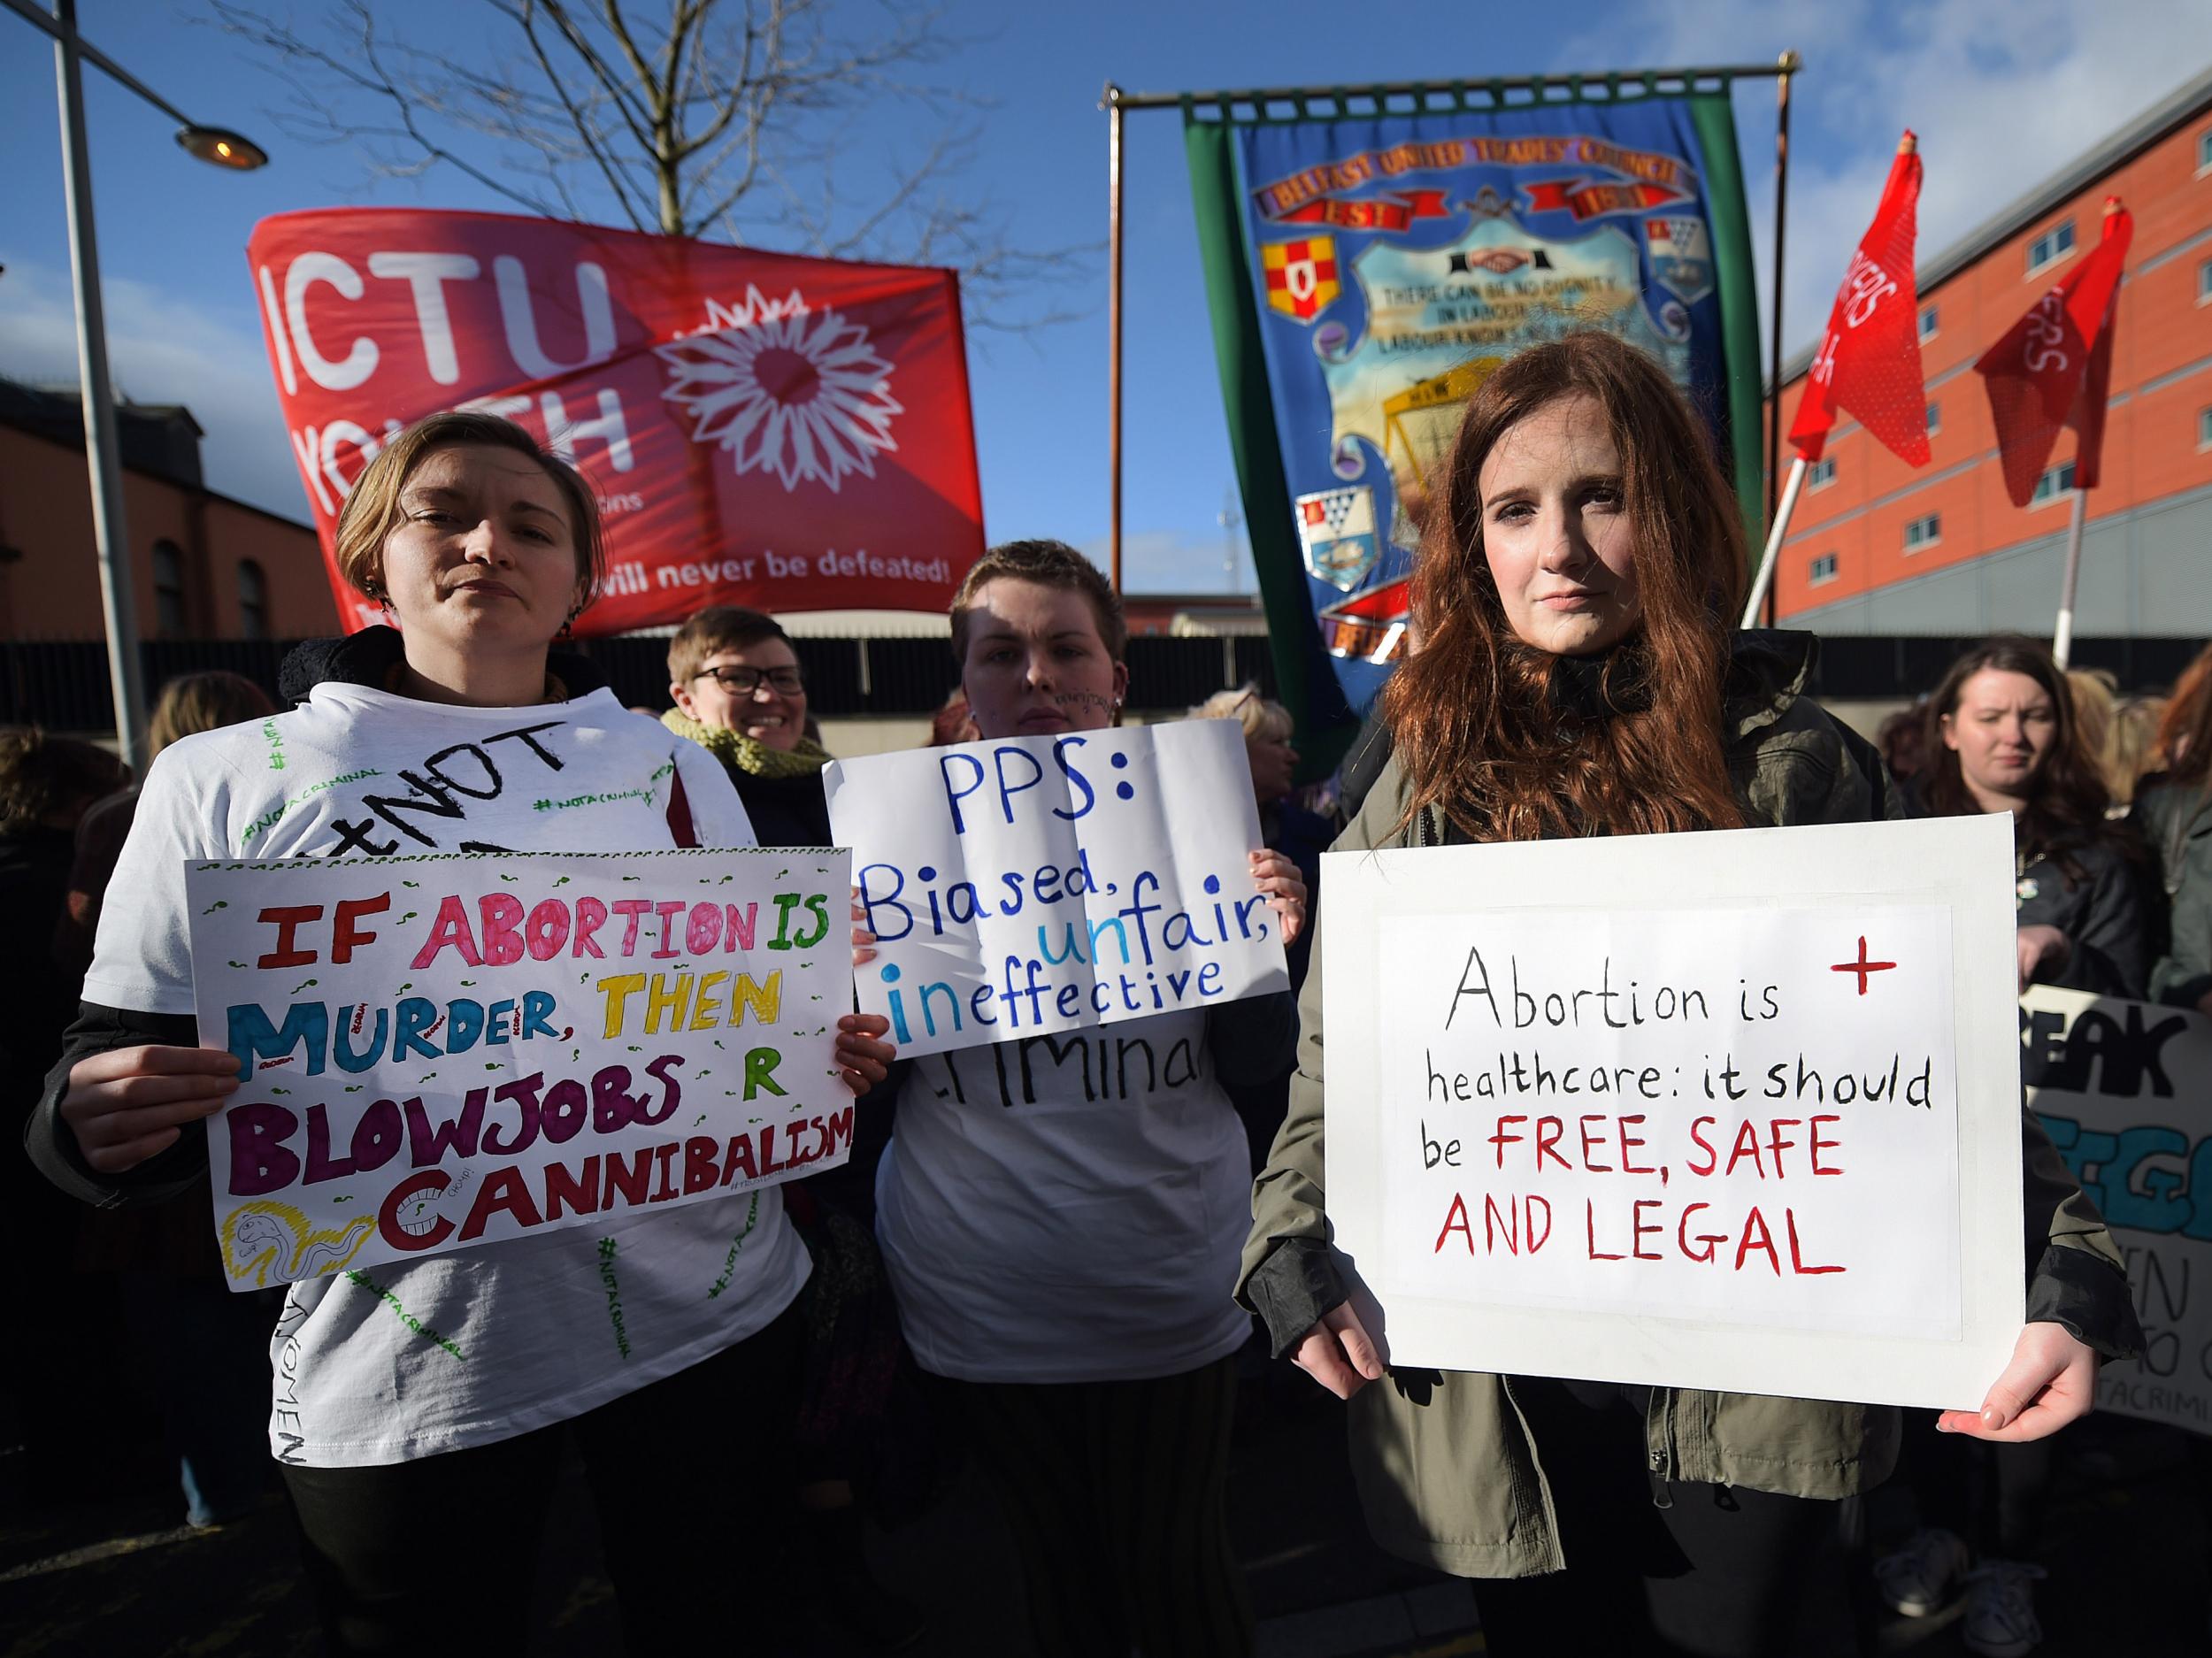 Pro-choice supporters protesting against the abortion ban in Northern Ireland